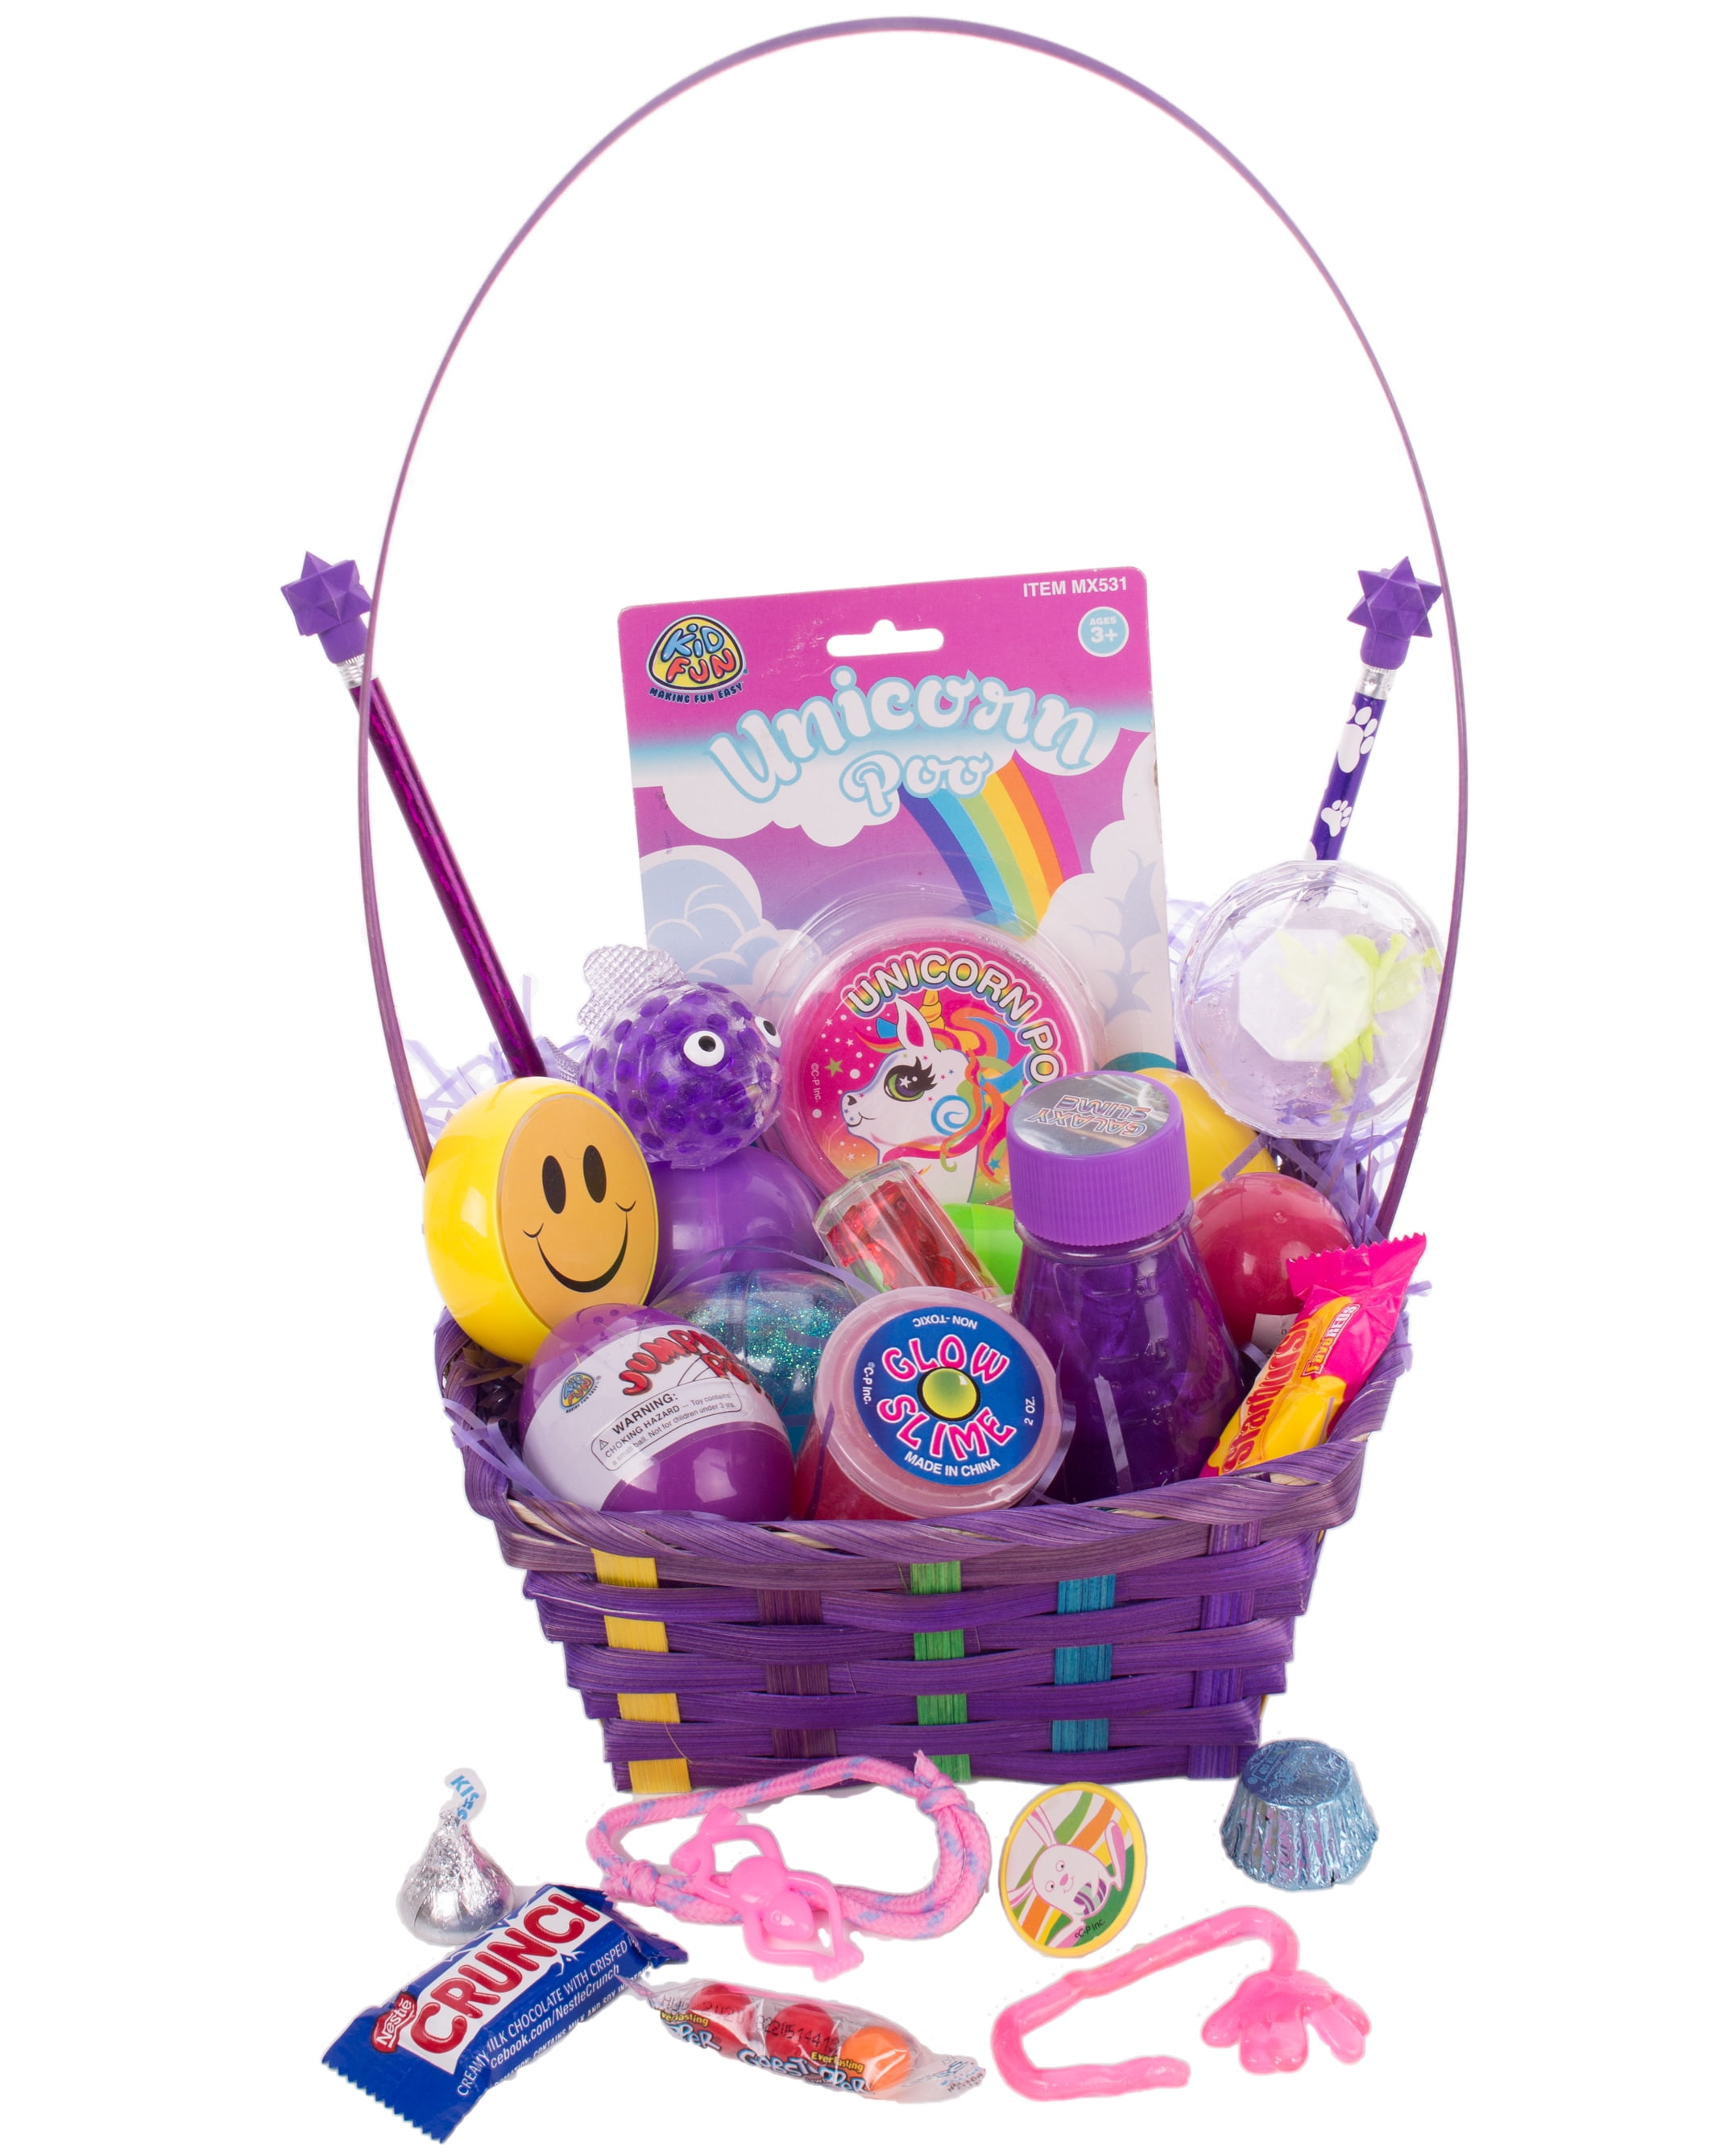 Disney Princess Baby/Toddler Girls Complete Easter Toys Gift Basket 20 Pieces